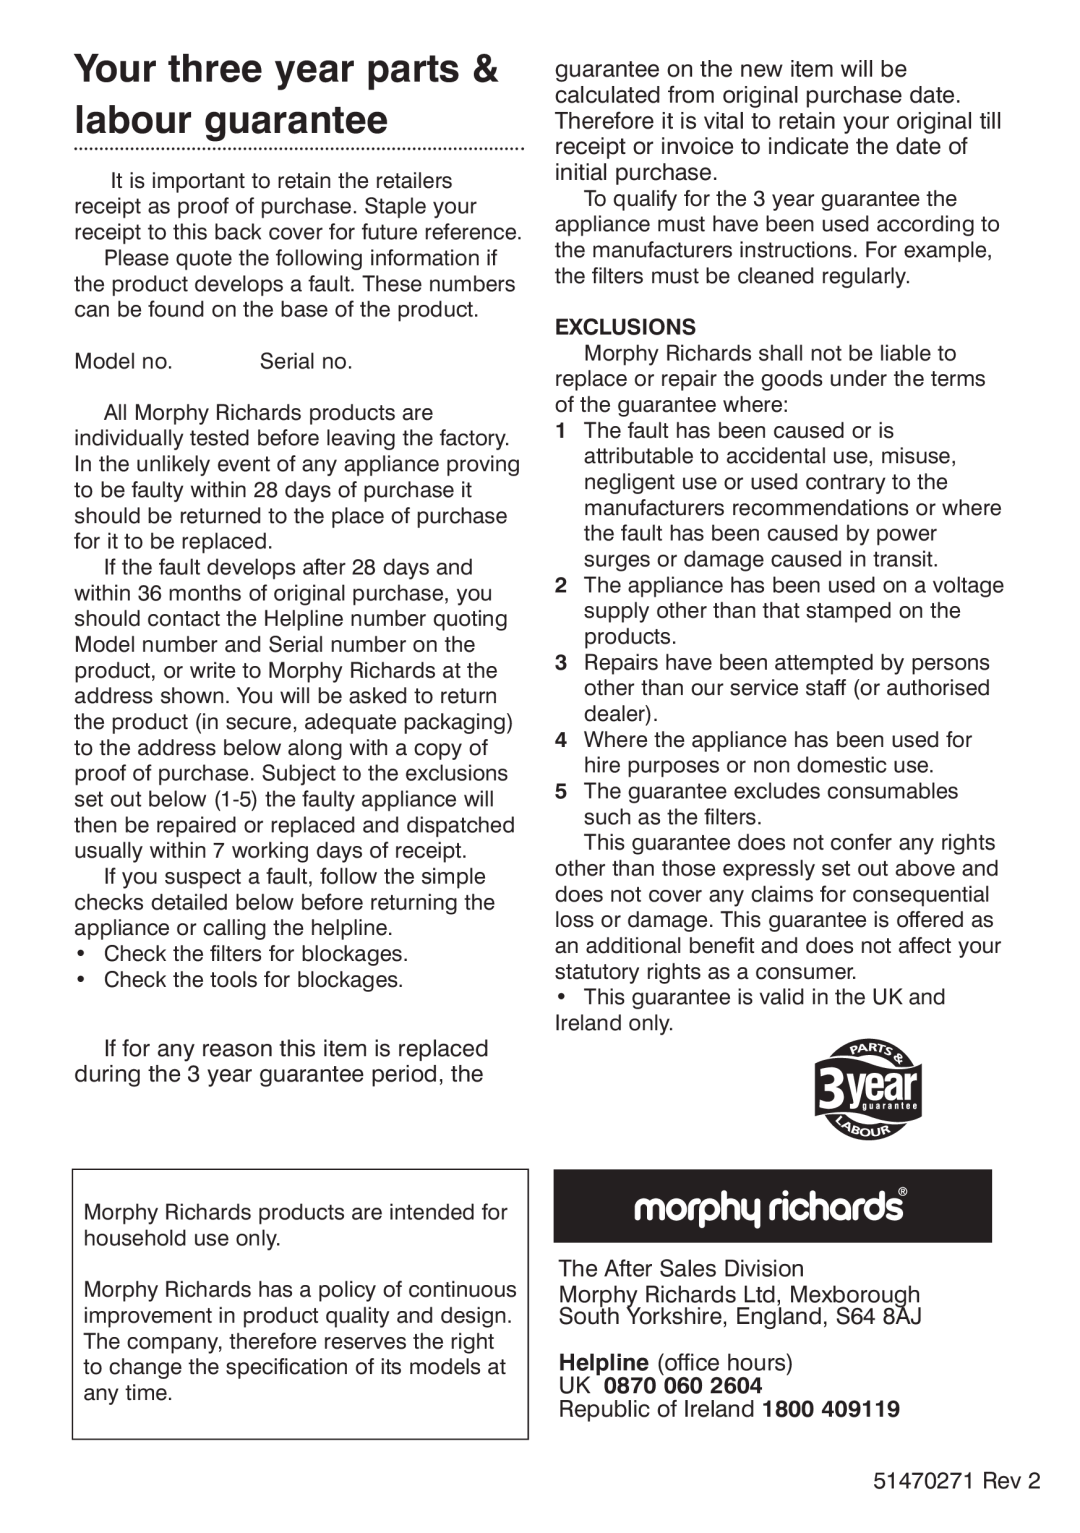 Morphy Richards Ecovac 70096 Rev 2 (Page 1) manual Your three year parts & labour guarantee, UK 0870, Exclusions 